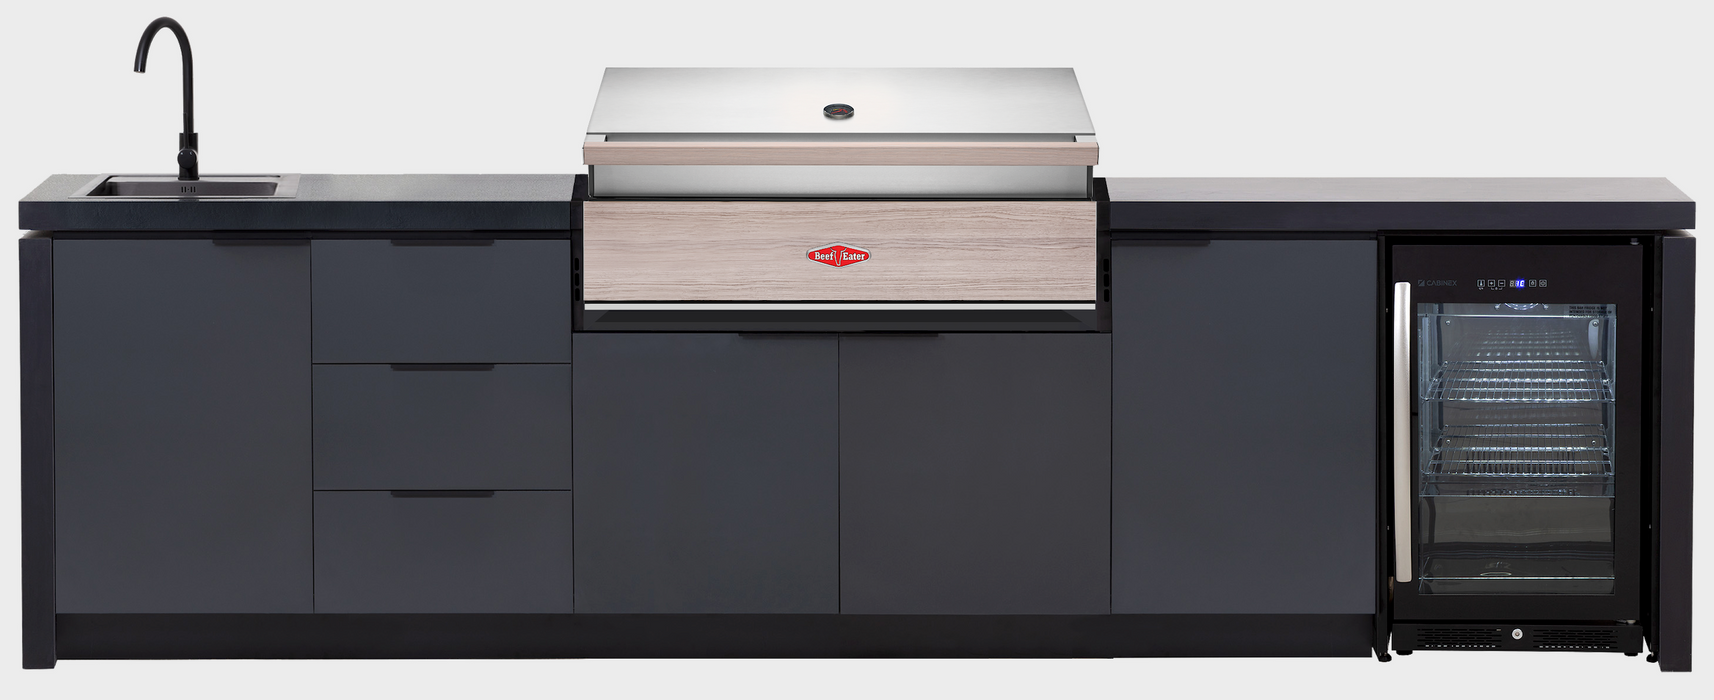 Cabinex Premium Outdoor Kitchen With Beefeater Discovery 1500 5 Burner Gas BBQ